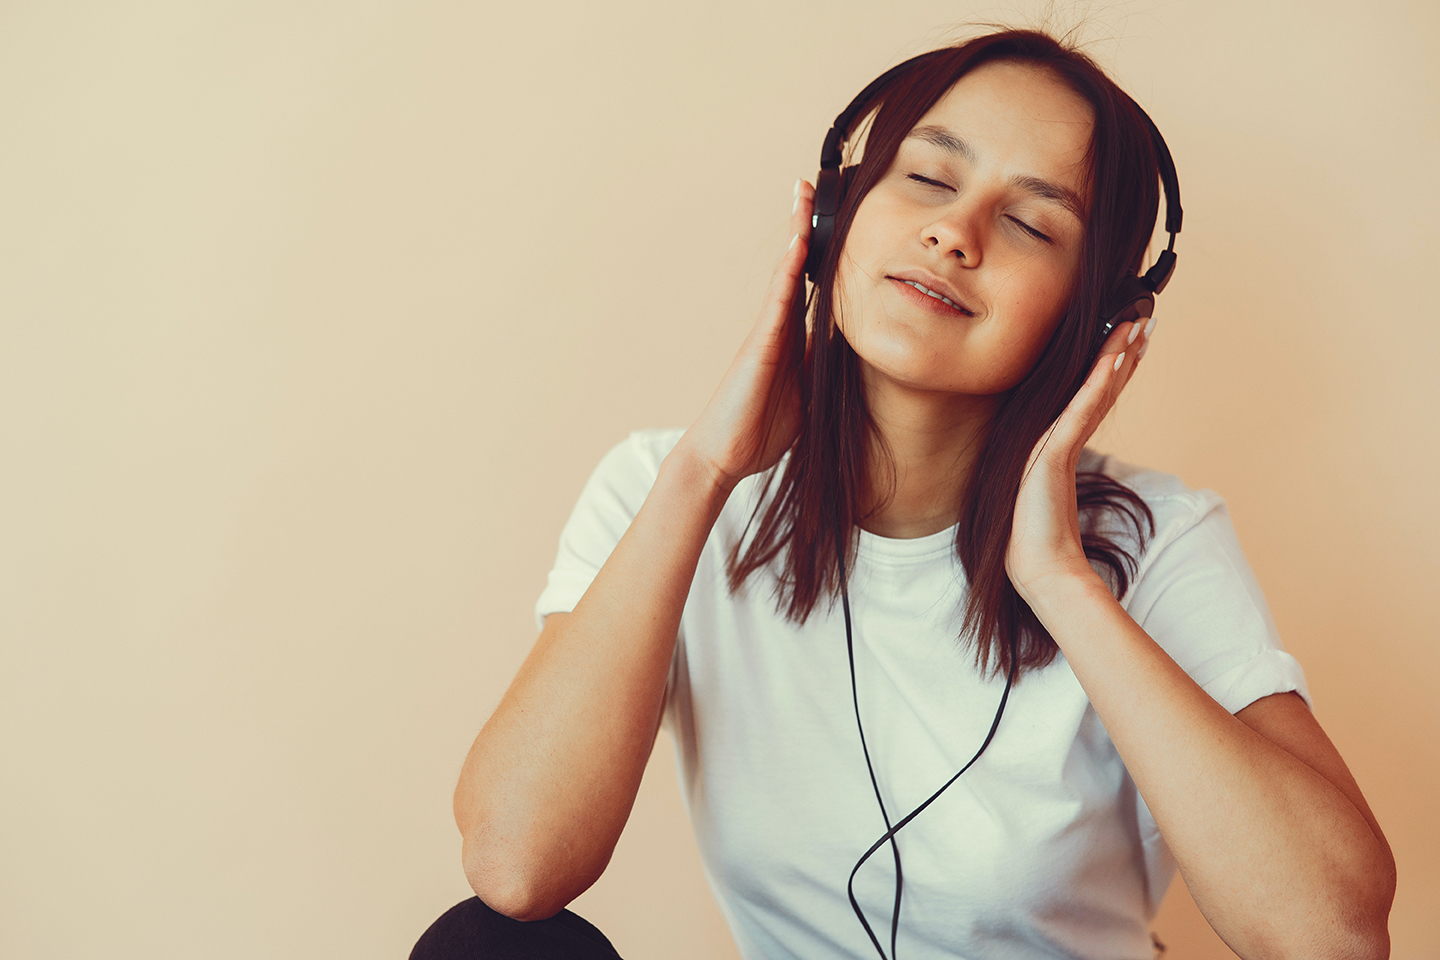 __woman smiling with headphones on and eyes closed